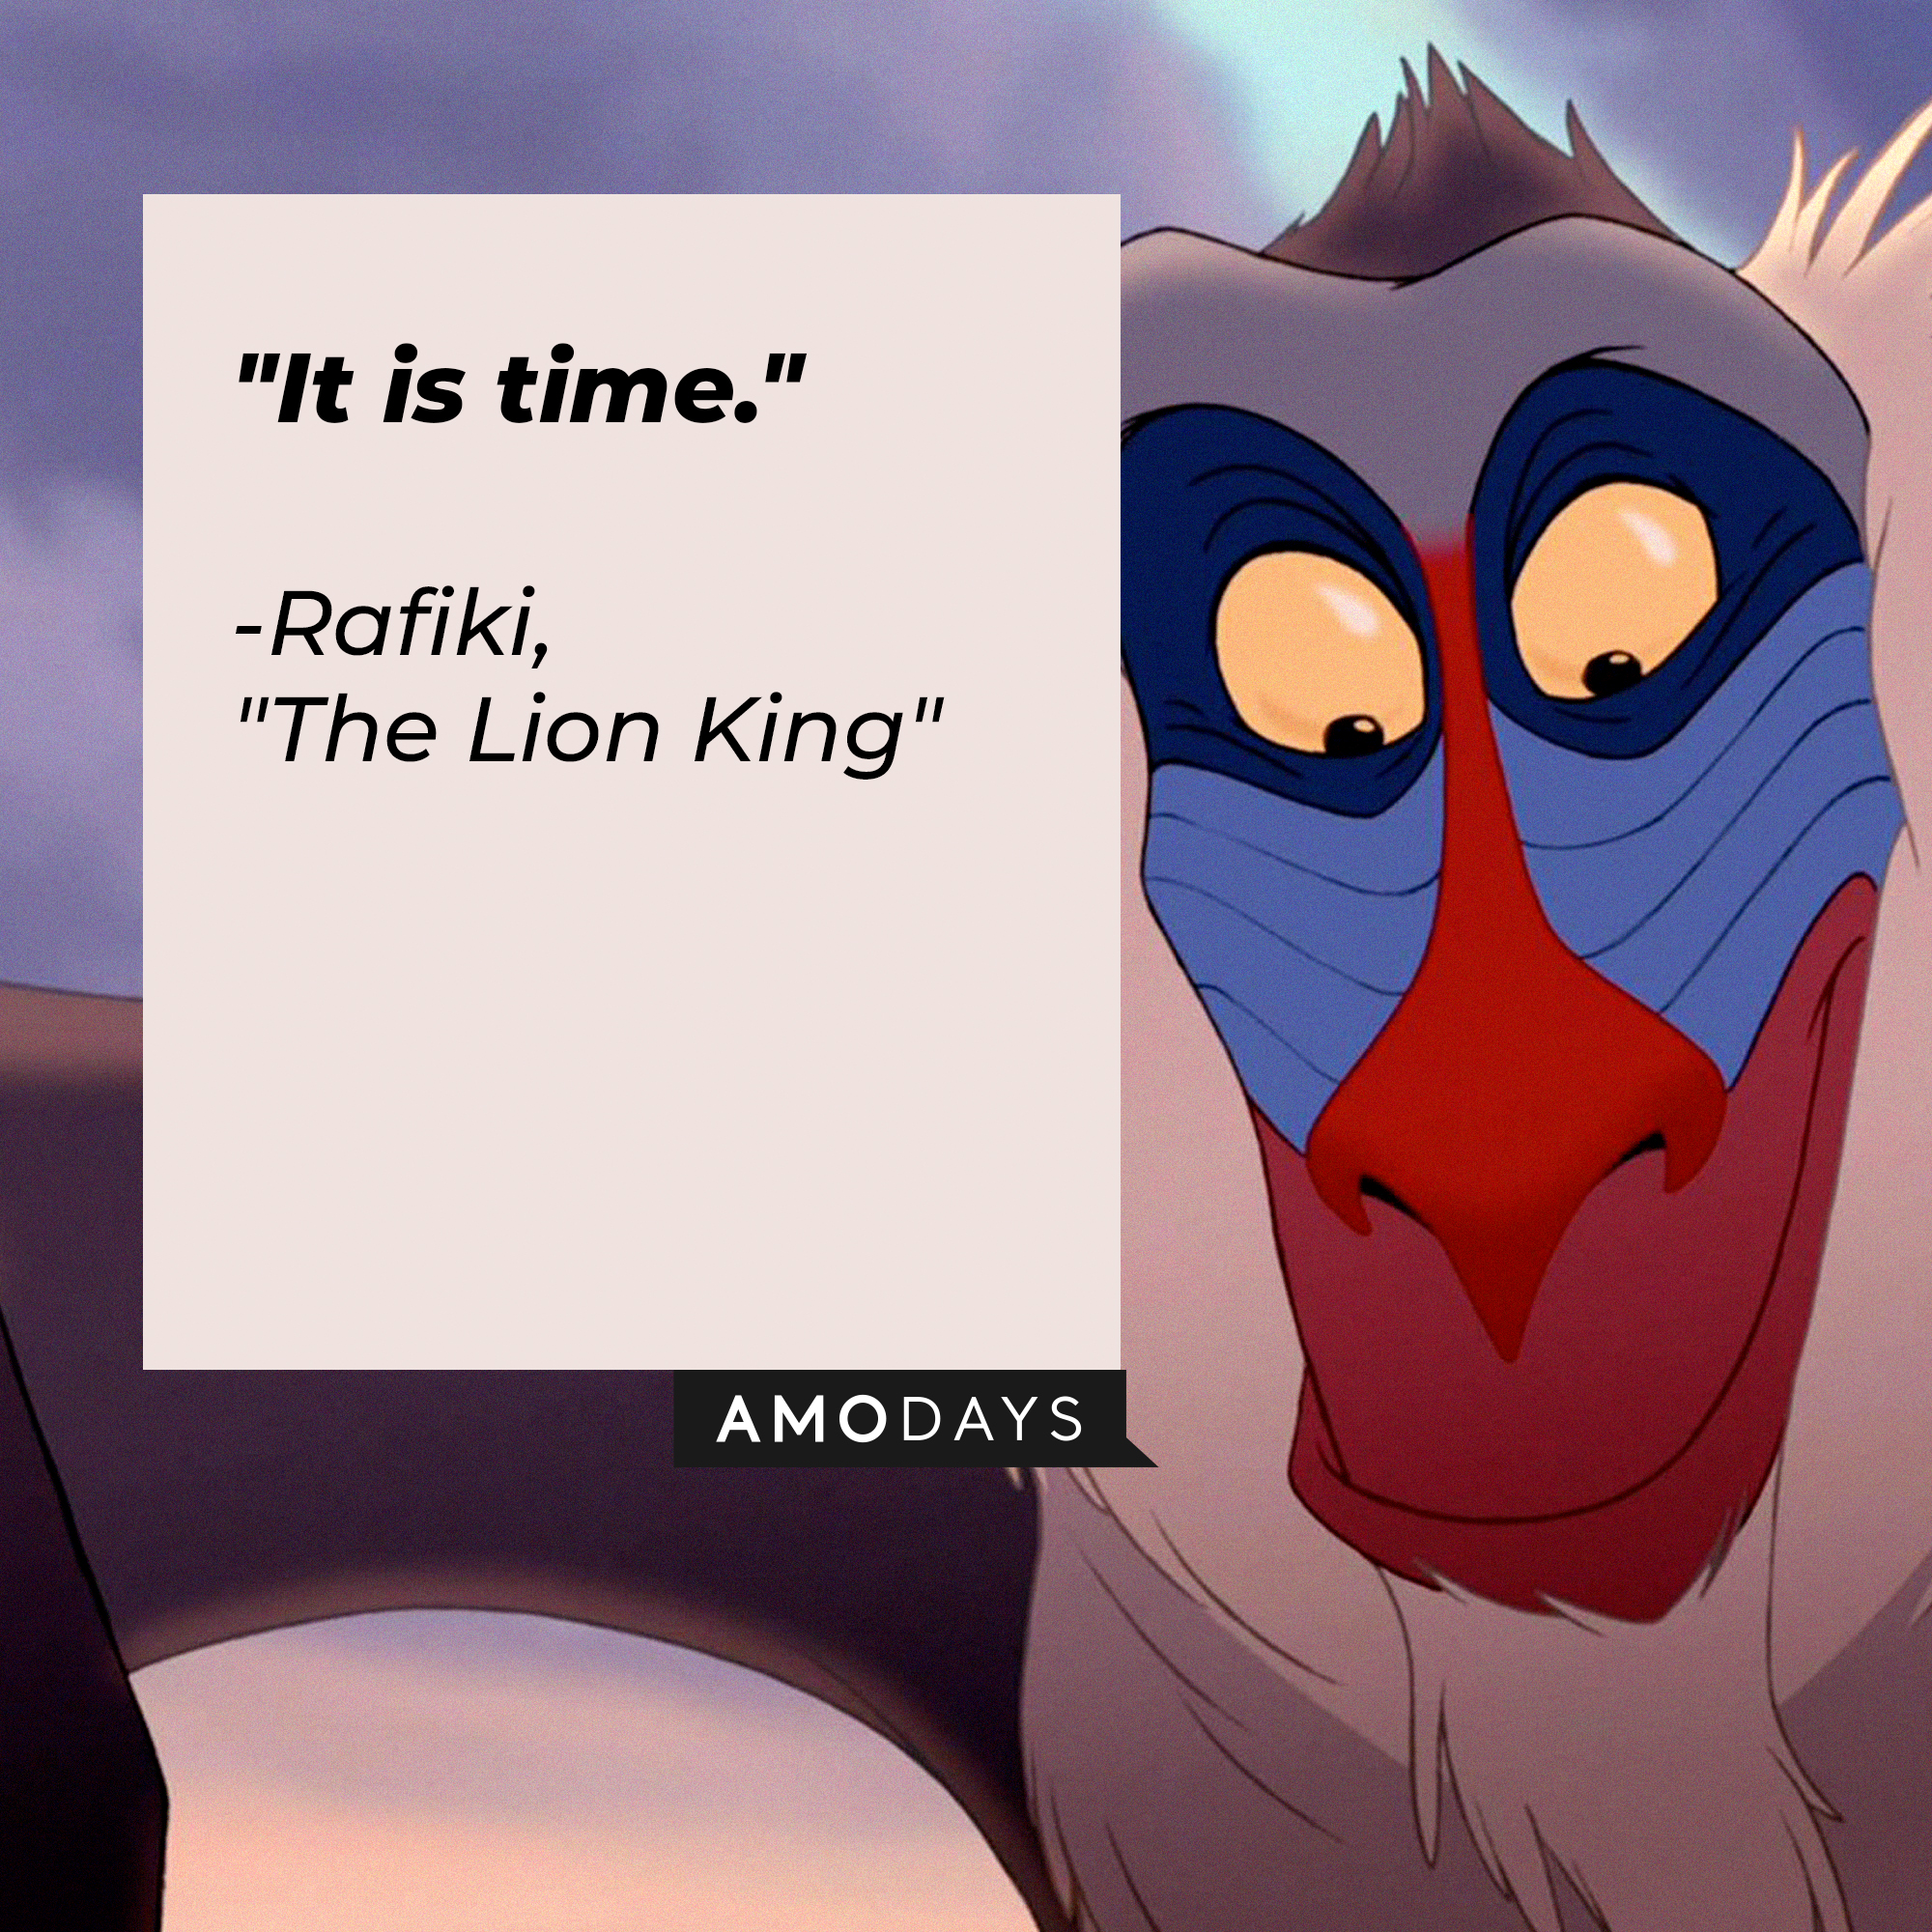 Rafiki with his quote: "It is time." | Source: Facebook.com/DisneyTheLionKing